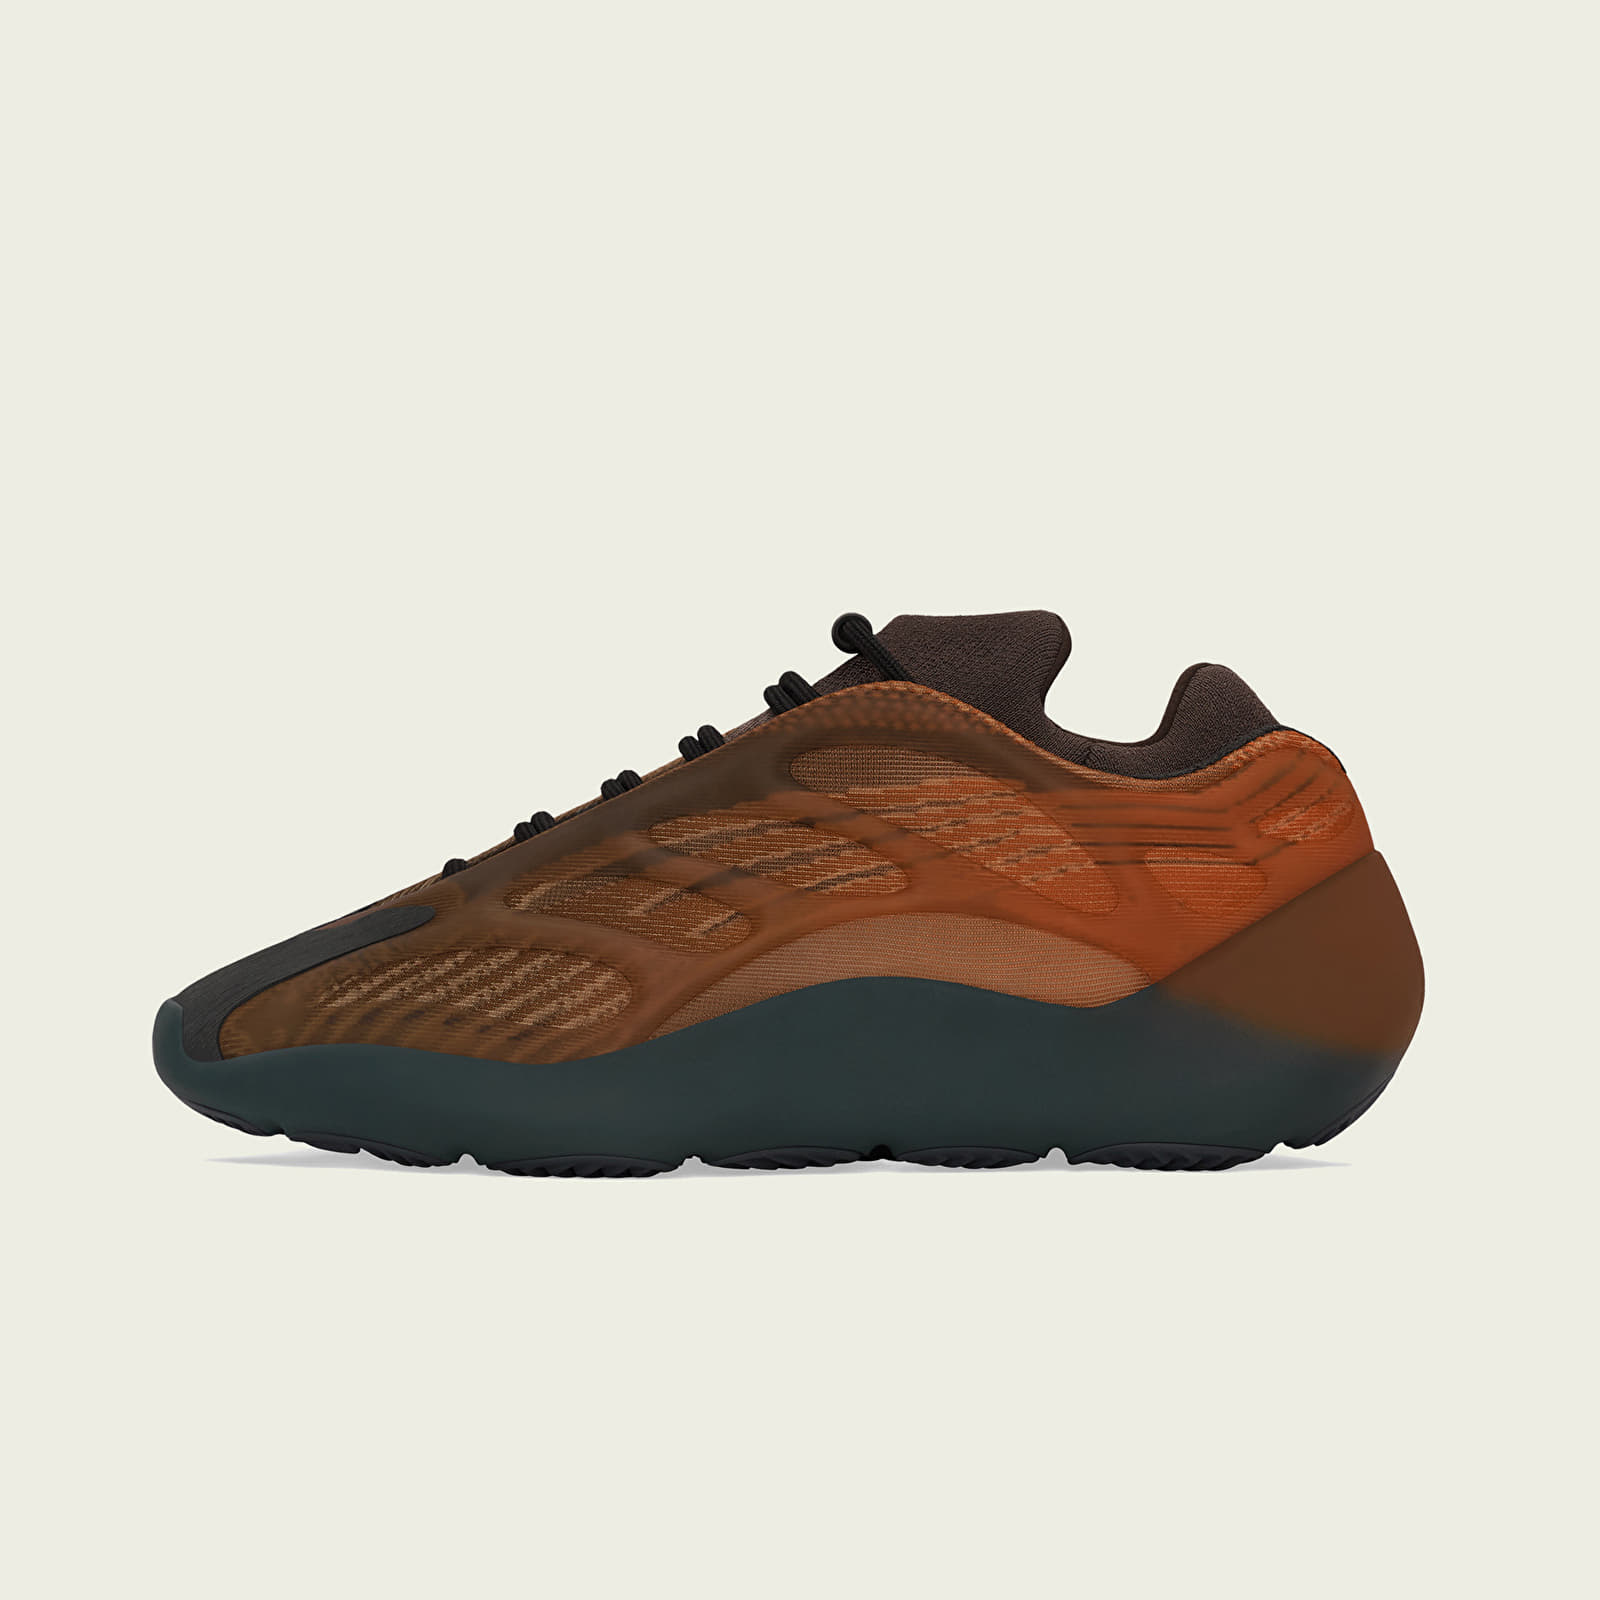 Chaussures et baskets homme adidas Yeezy 700 V3 Copper Fade/ Copper Fade/ Copper Fade